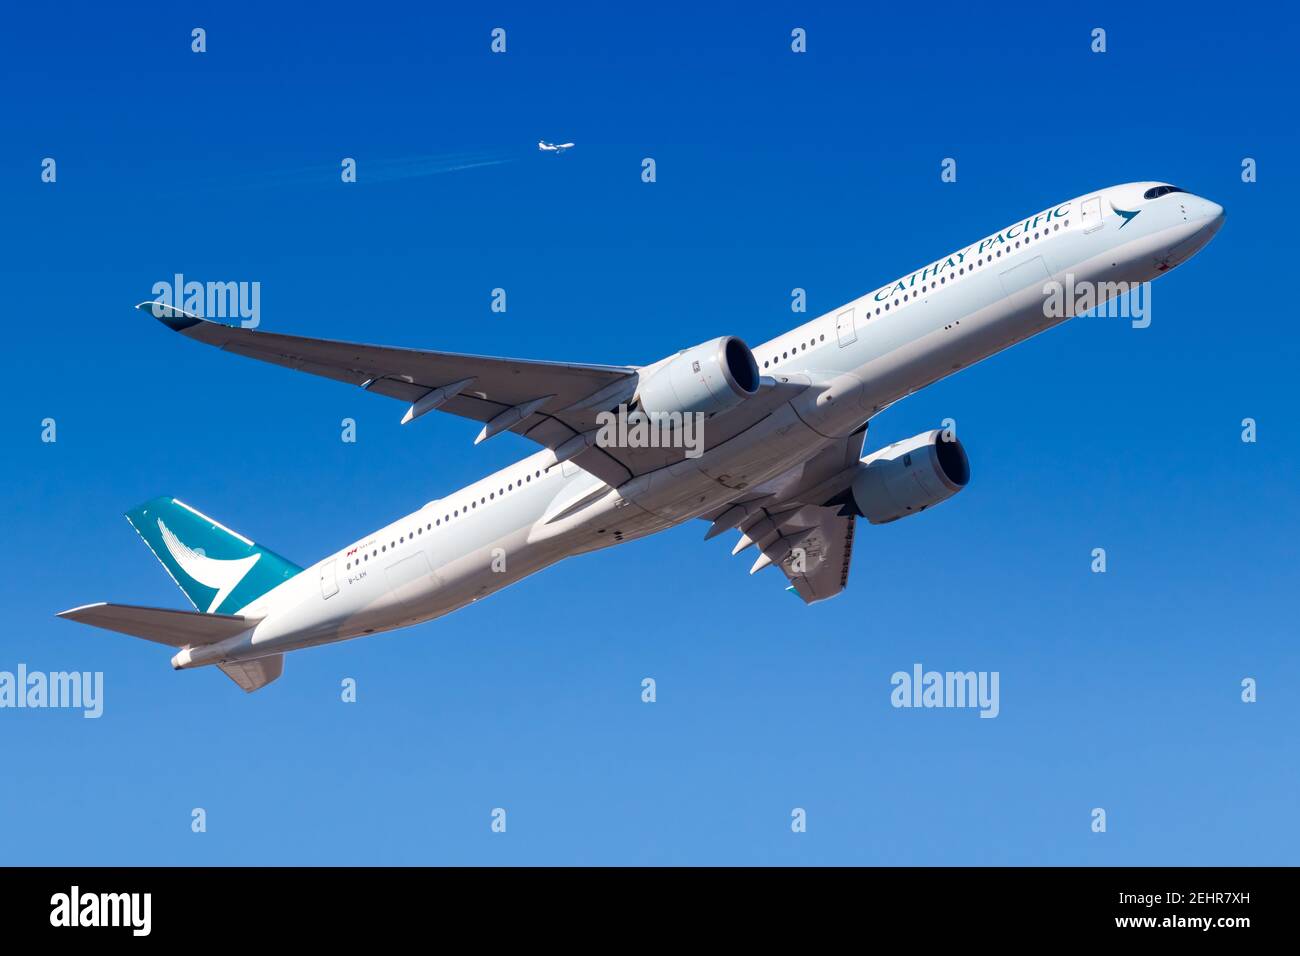 Frankfurt, Germany - February 13, 2021: Cathay Pacific Airbus A350-1000 airplane at Frankfurt Airport (FRA) in Germany. Airbus is a European aircraft Stock Photo